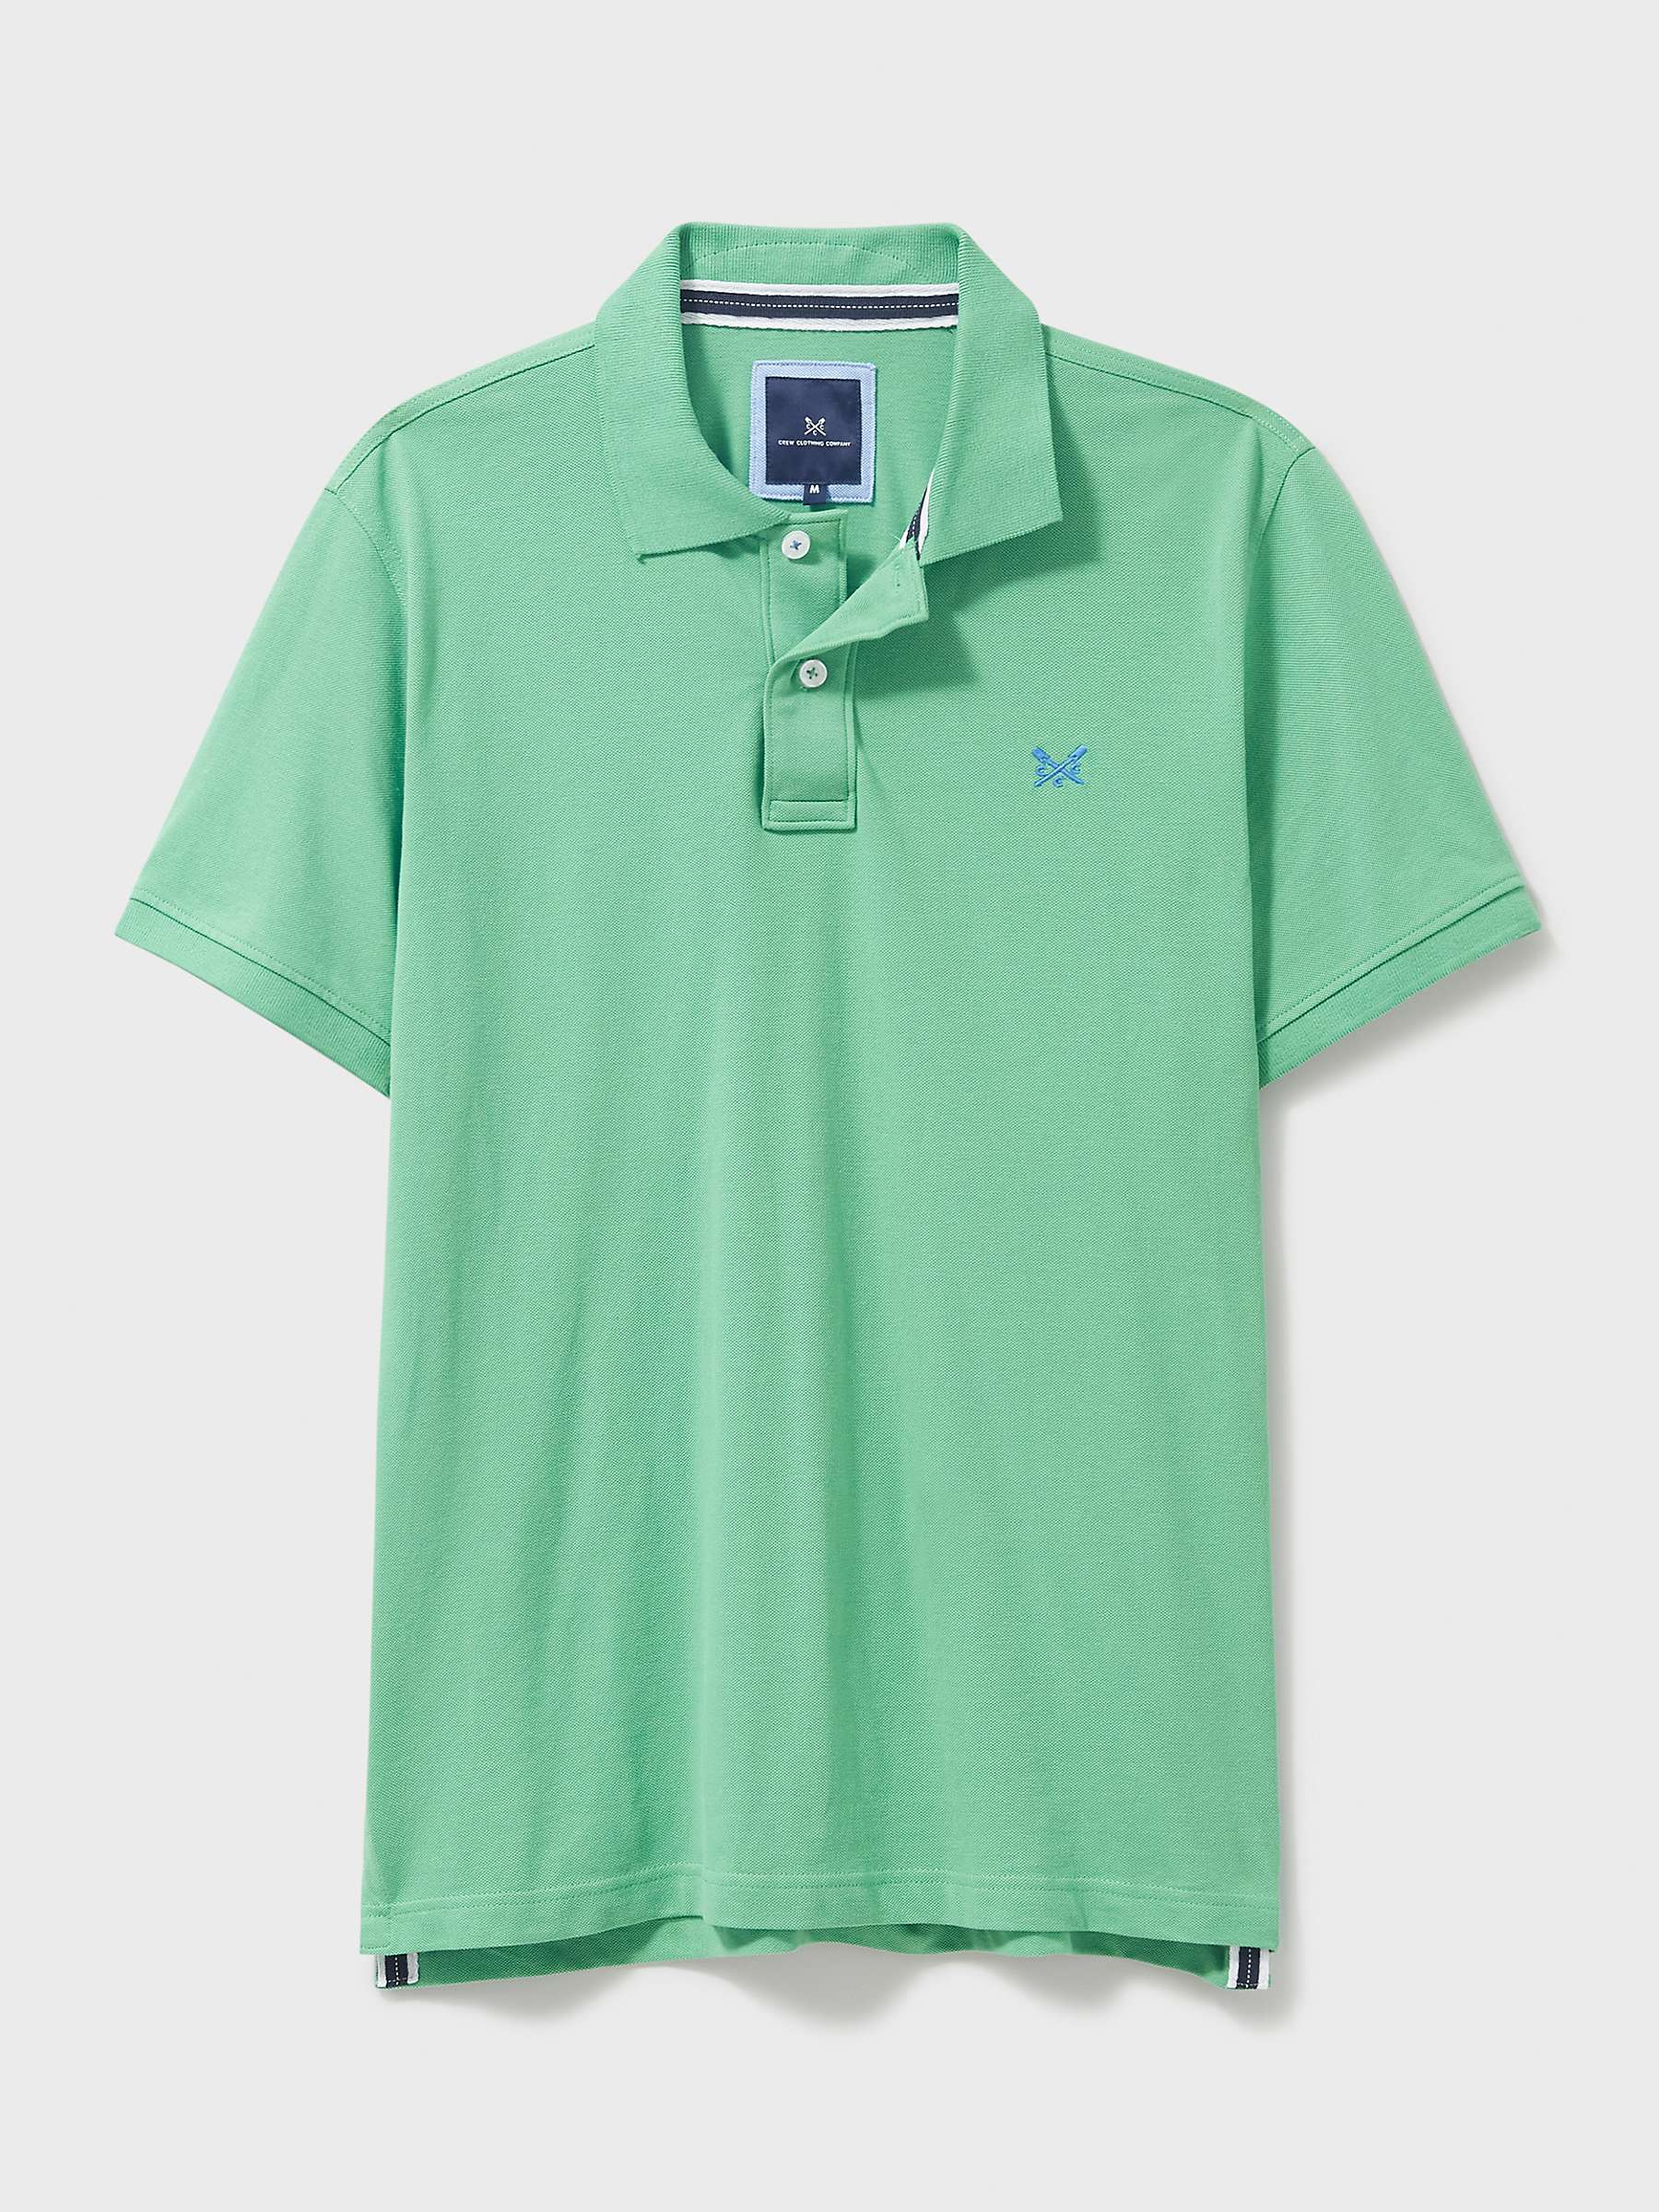 Crew Clothing Classic Pique Polo Shirt, Green at John Lewis & Partners